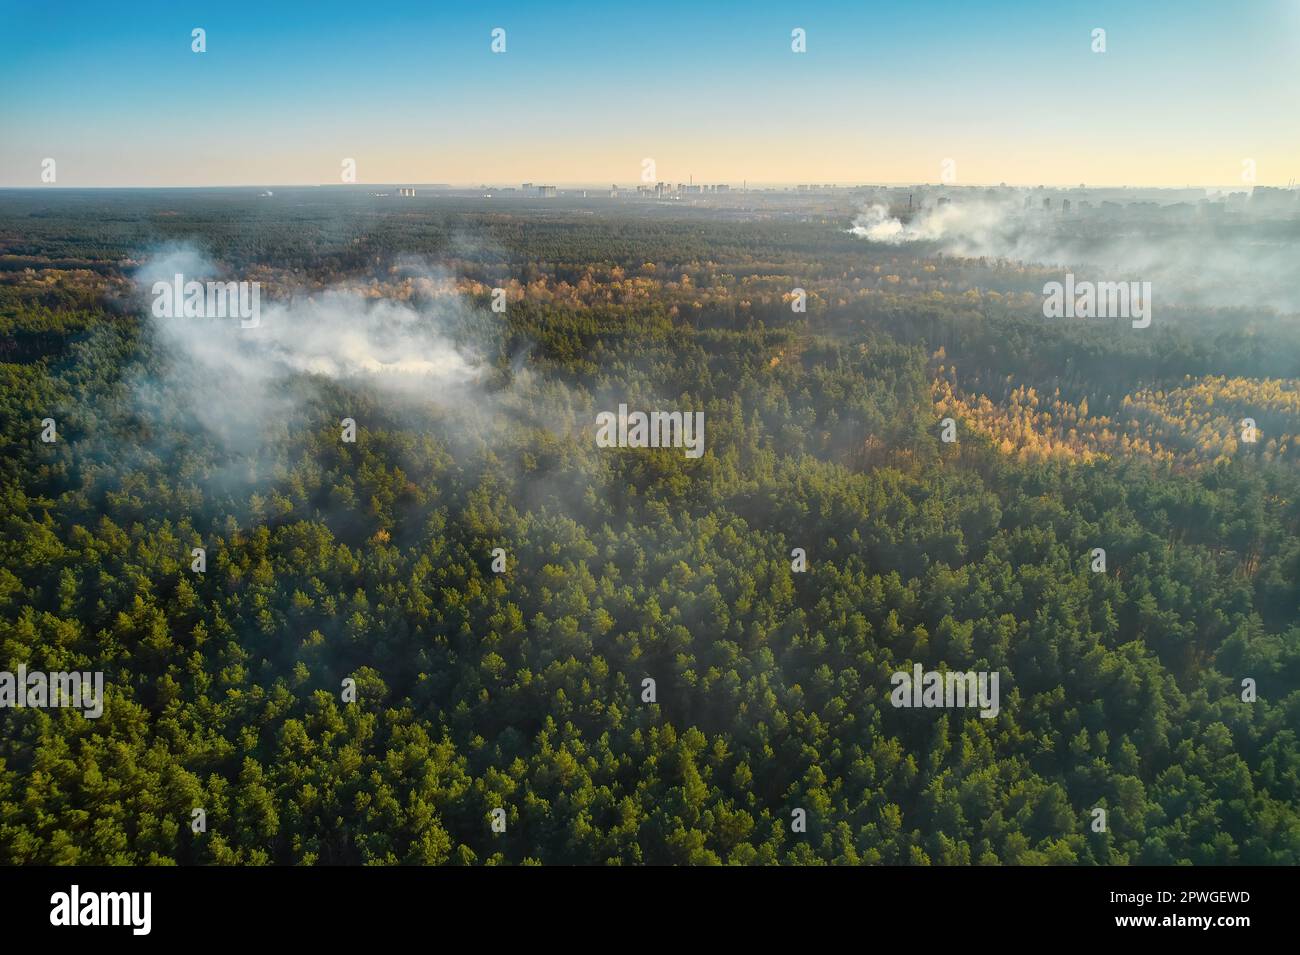 Strong fire in an empty forest. Fire spreads in a united front, strong smoke from the burning place. View from above, vertically from top to bottom. n Stock Photo